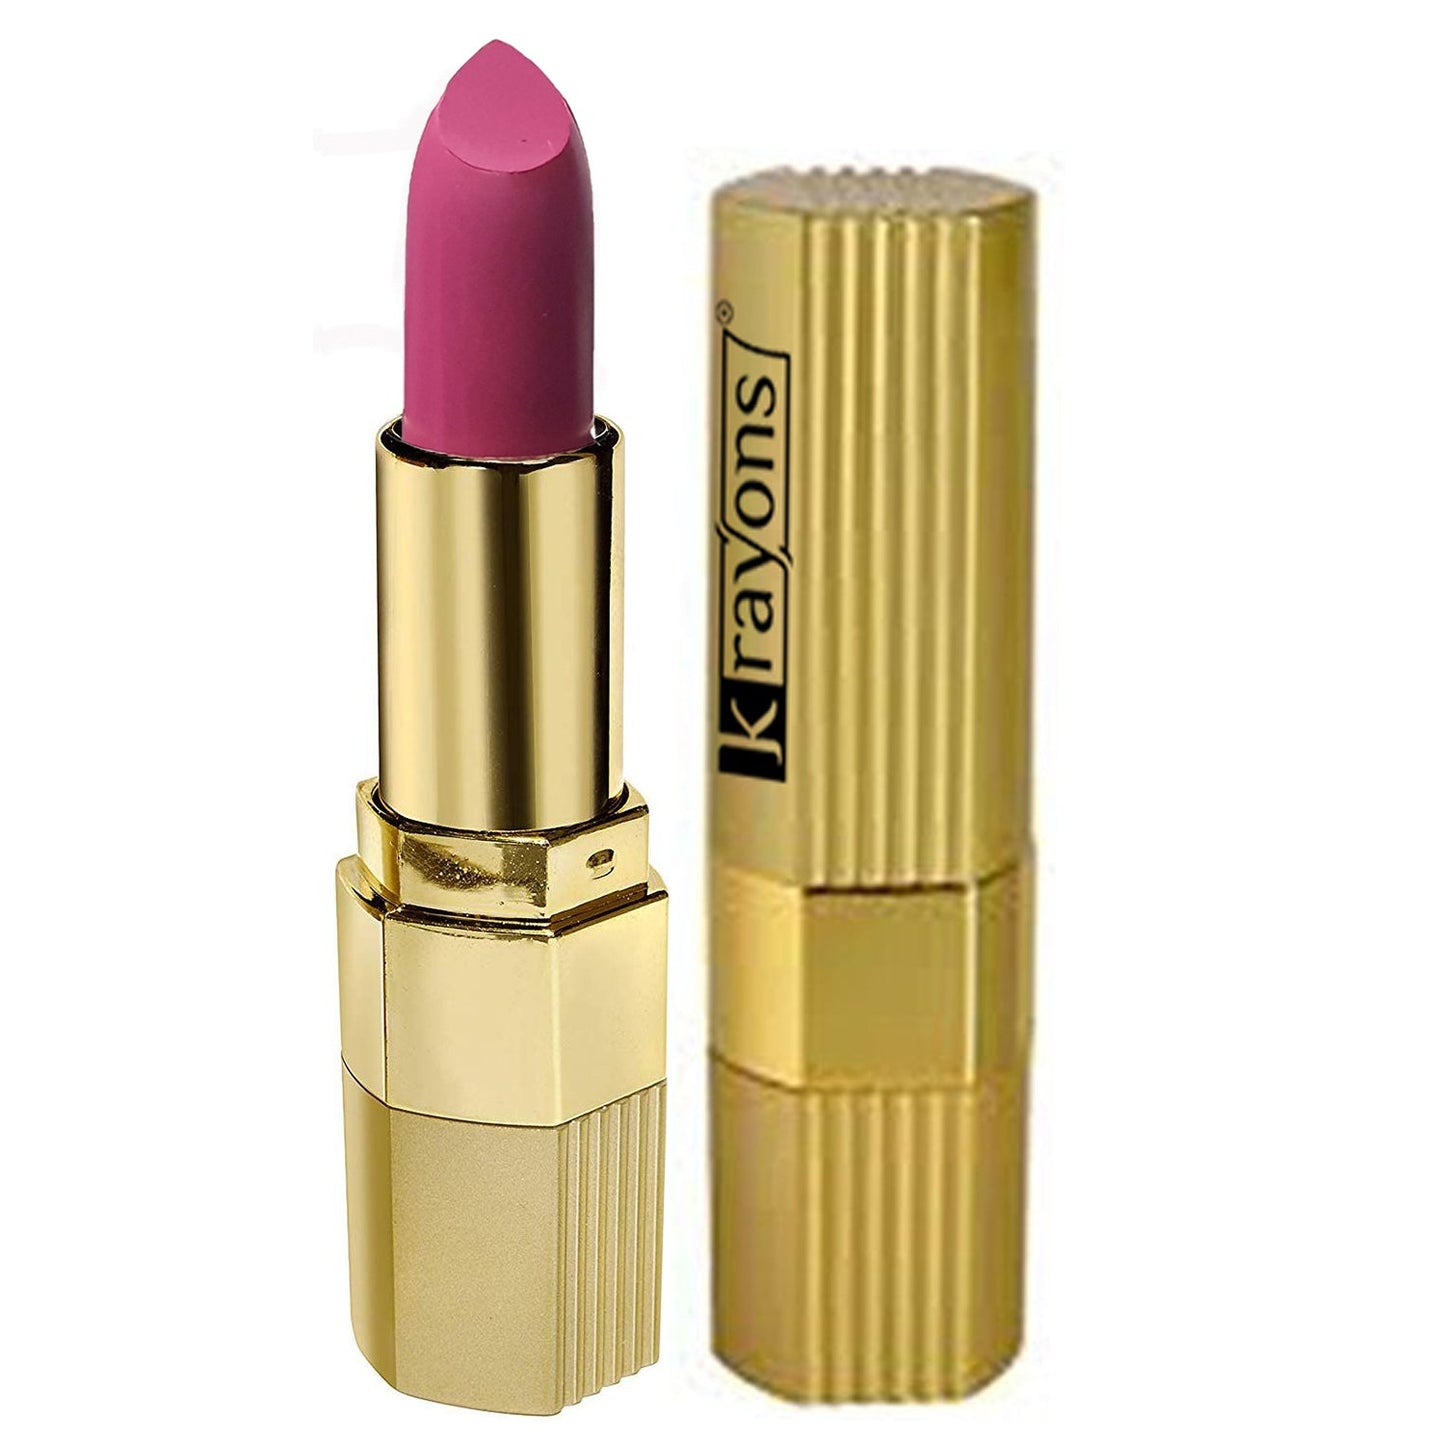 Krayons Desire Matte Lipstick, Highly Pigmented, Longlasting, 3.5g (Pink Mulbery)